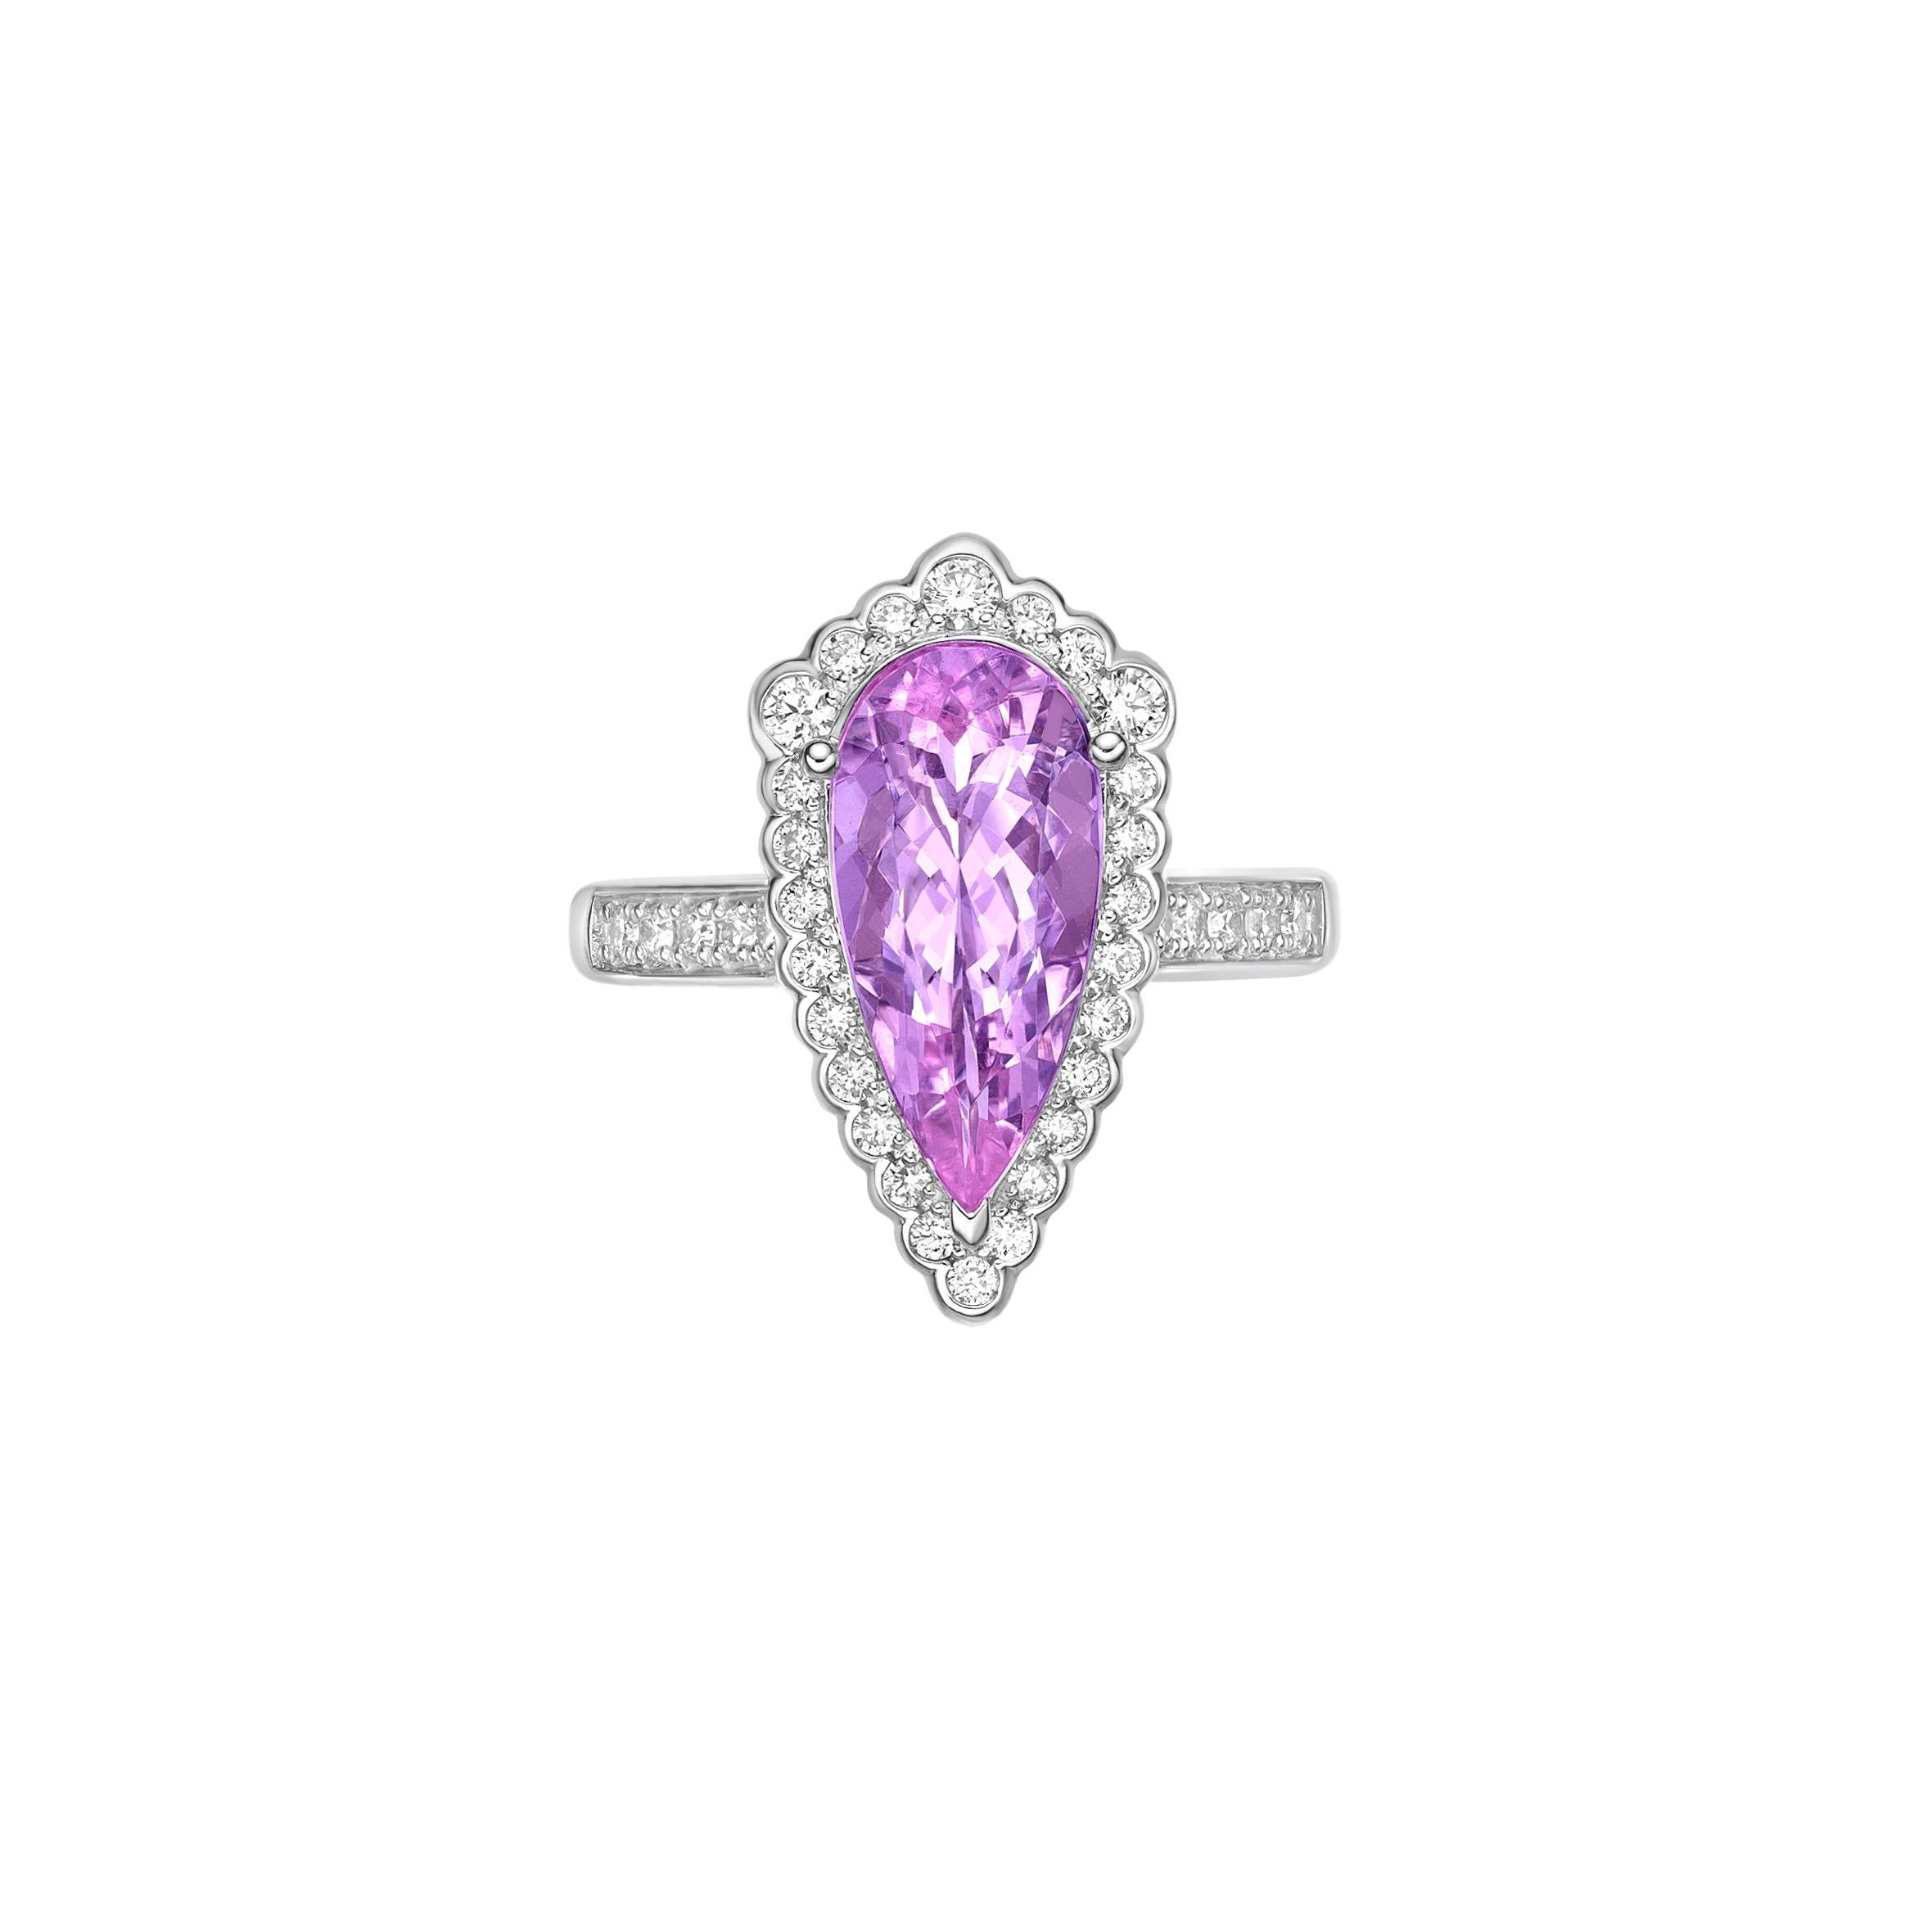 Contemporary 2.79 Carat Pink Morganite Fancy Ring in 18Karat White Gold with White Diamond.   For Sale